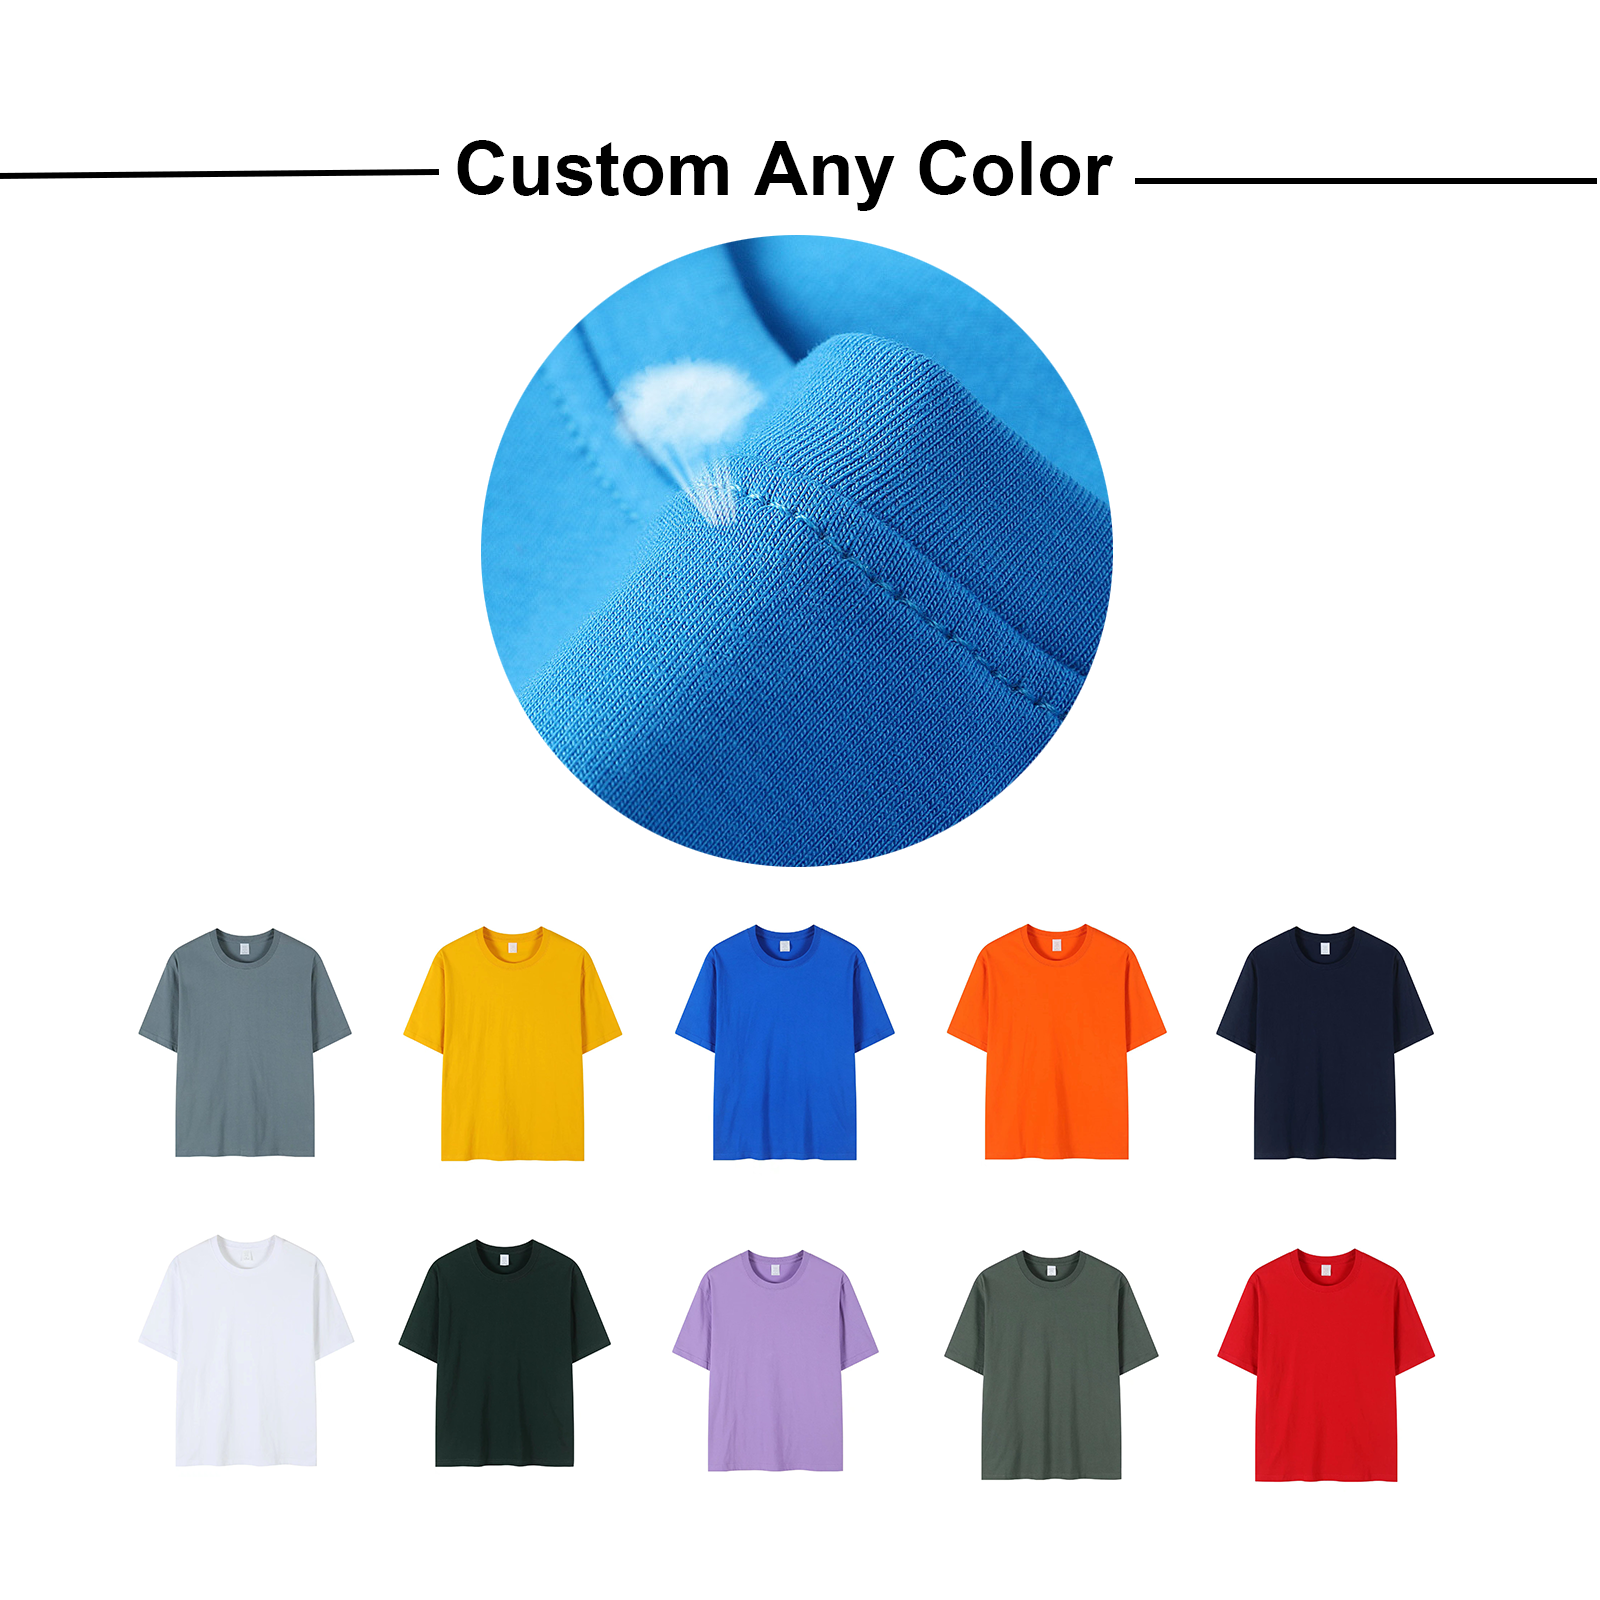 Customized Shirt Unisex Personalized Add Your Image Shirt Add Your Text Photo Front and Back Print Men's T-Shirt